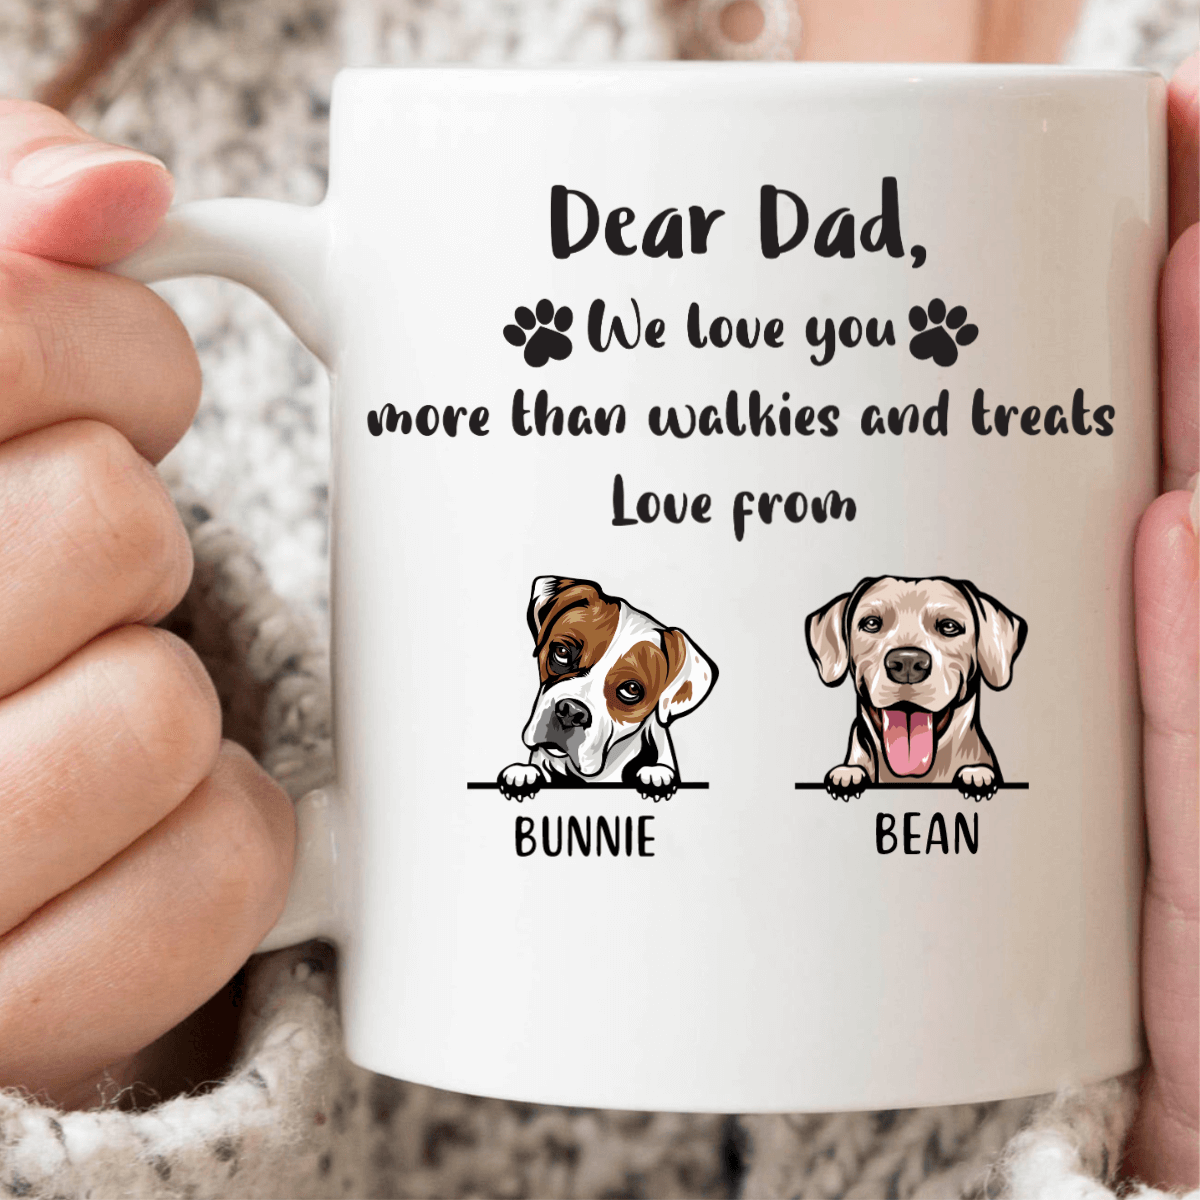 GeckoCustom Personalized Custom Coffee Mug, Dog Lover Gift, Fathers Day Gift, Love You More Than Walkies And Treats 11oz